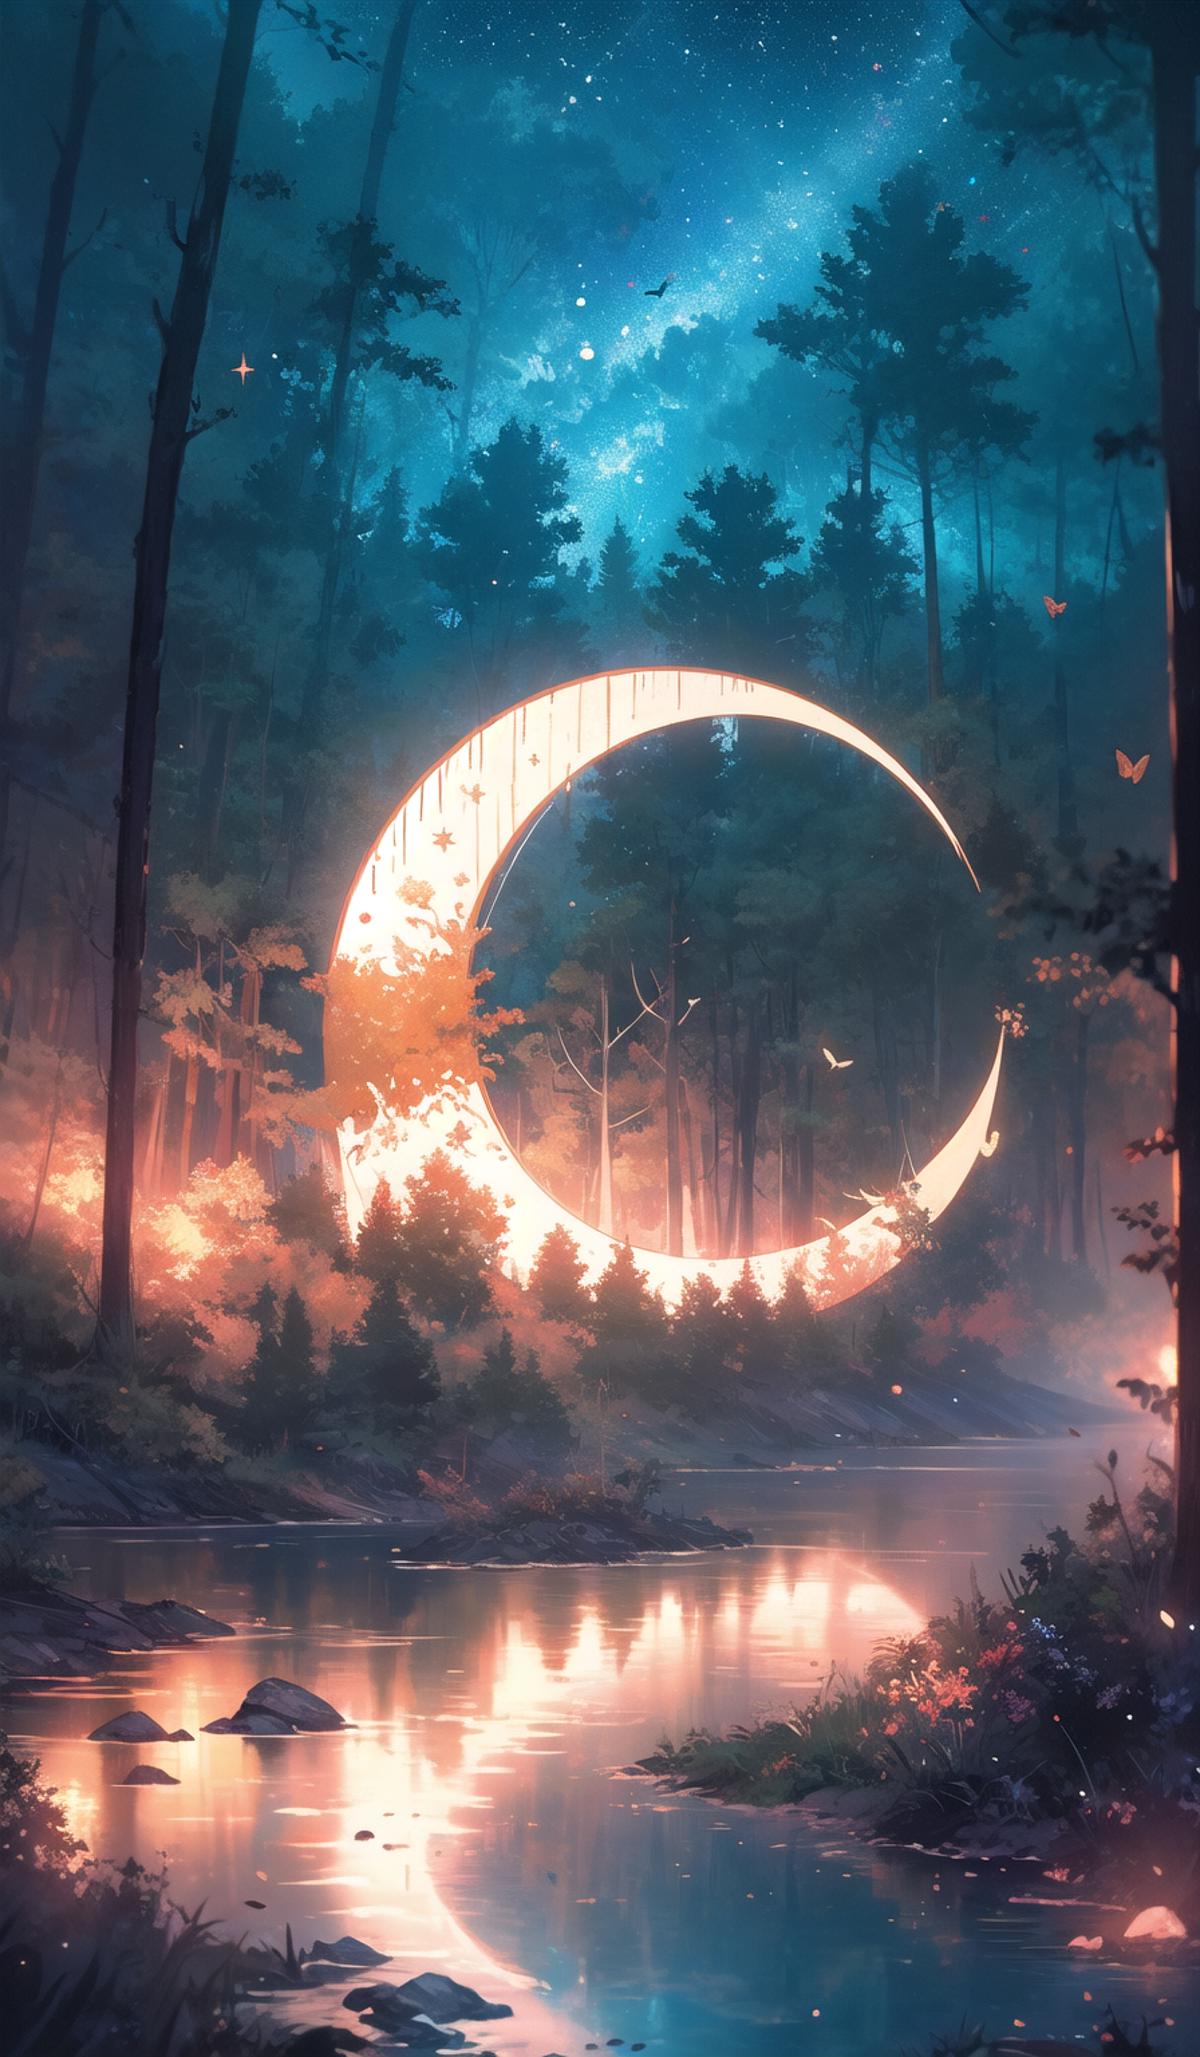 Artistic Illustration of a Full Moon Over a Forest at Night